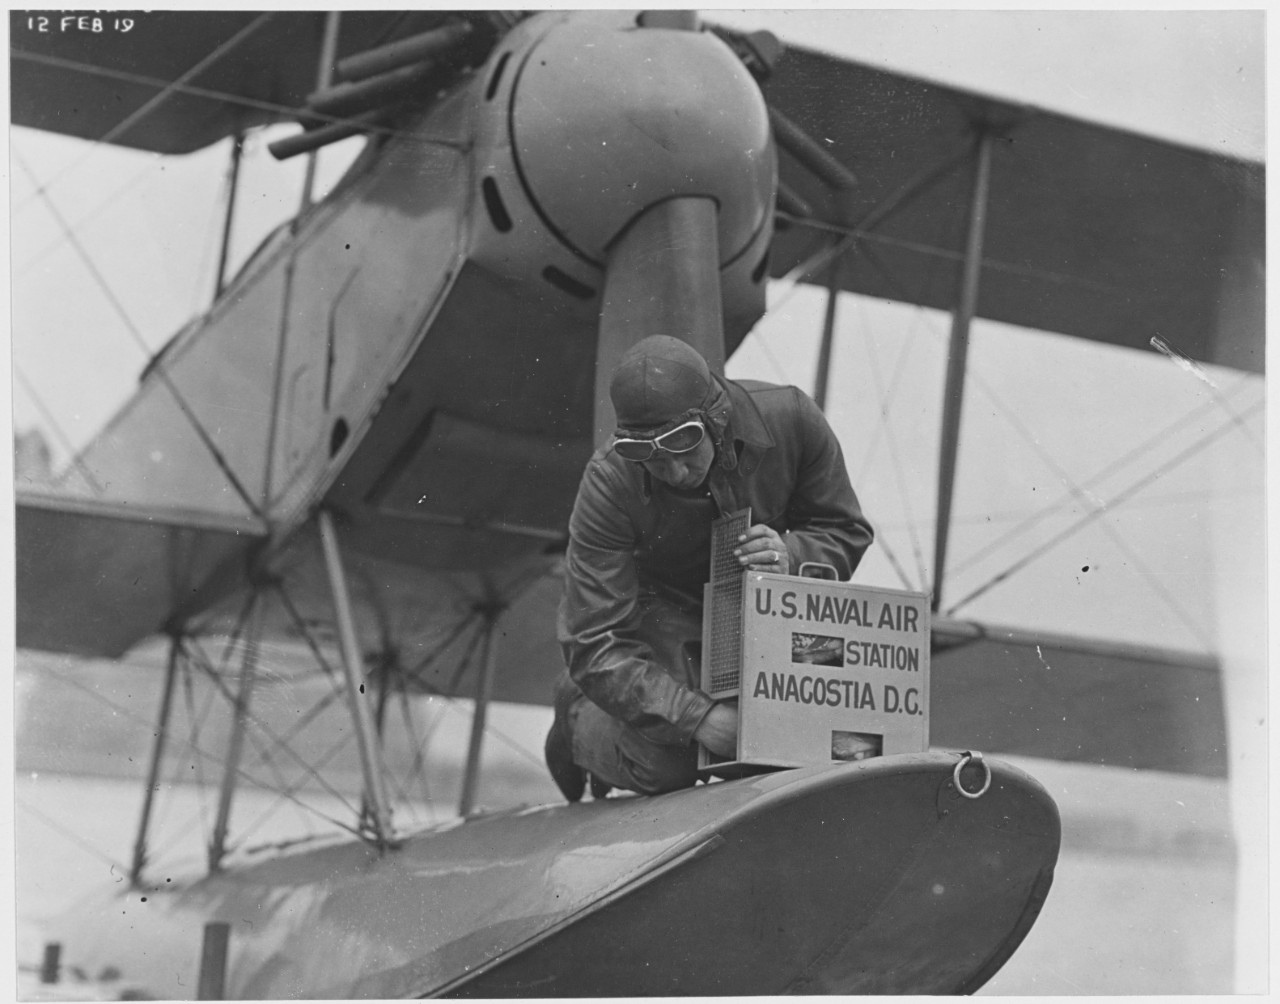 Pilot releasing carrier pigeon from pigeon box after landing, U.S. Naval Air Station, Anacostia, Washington, D.C. February 12, 1919.